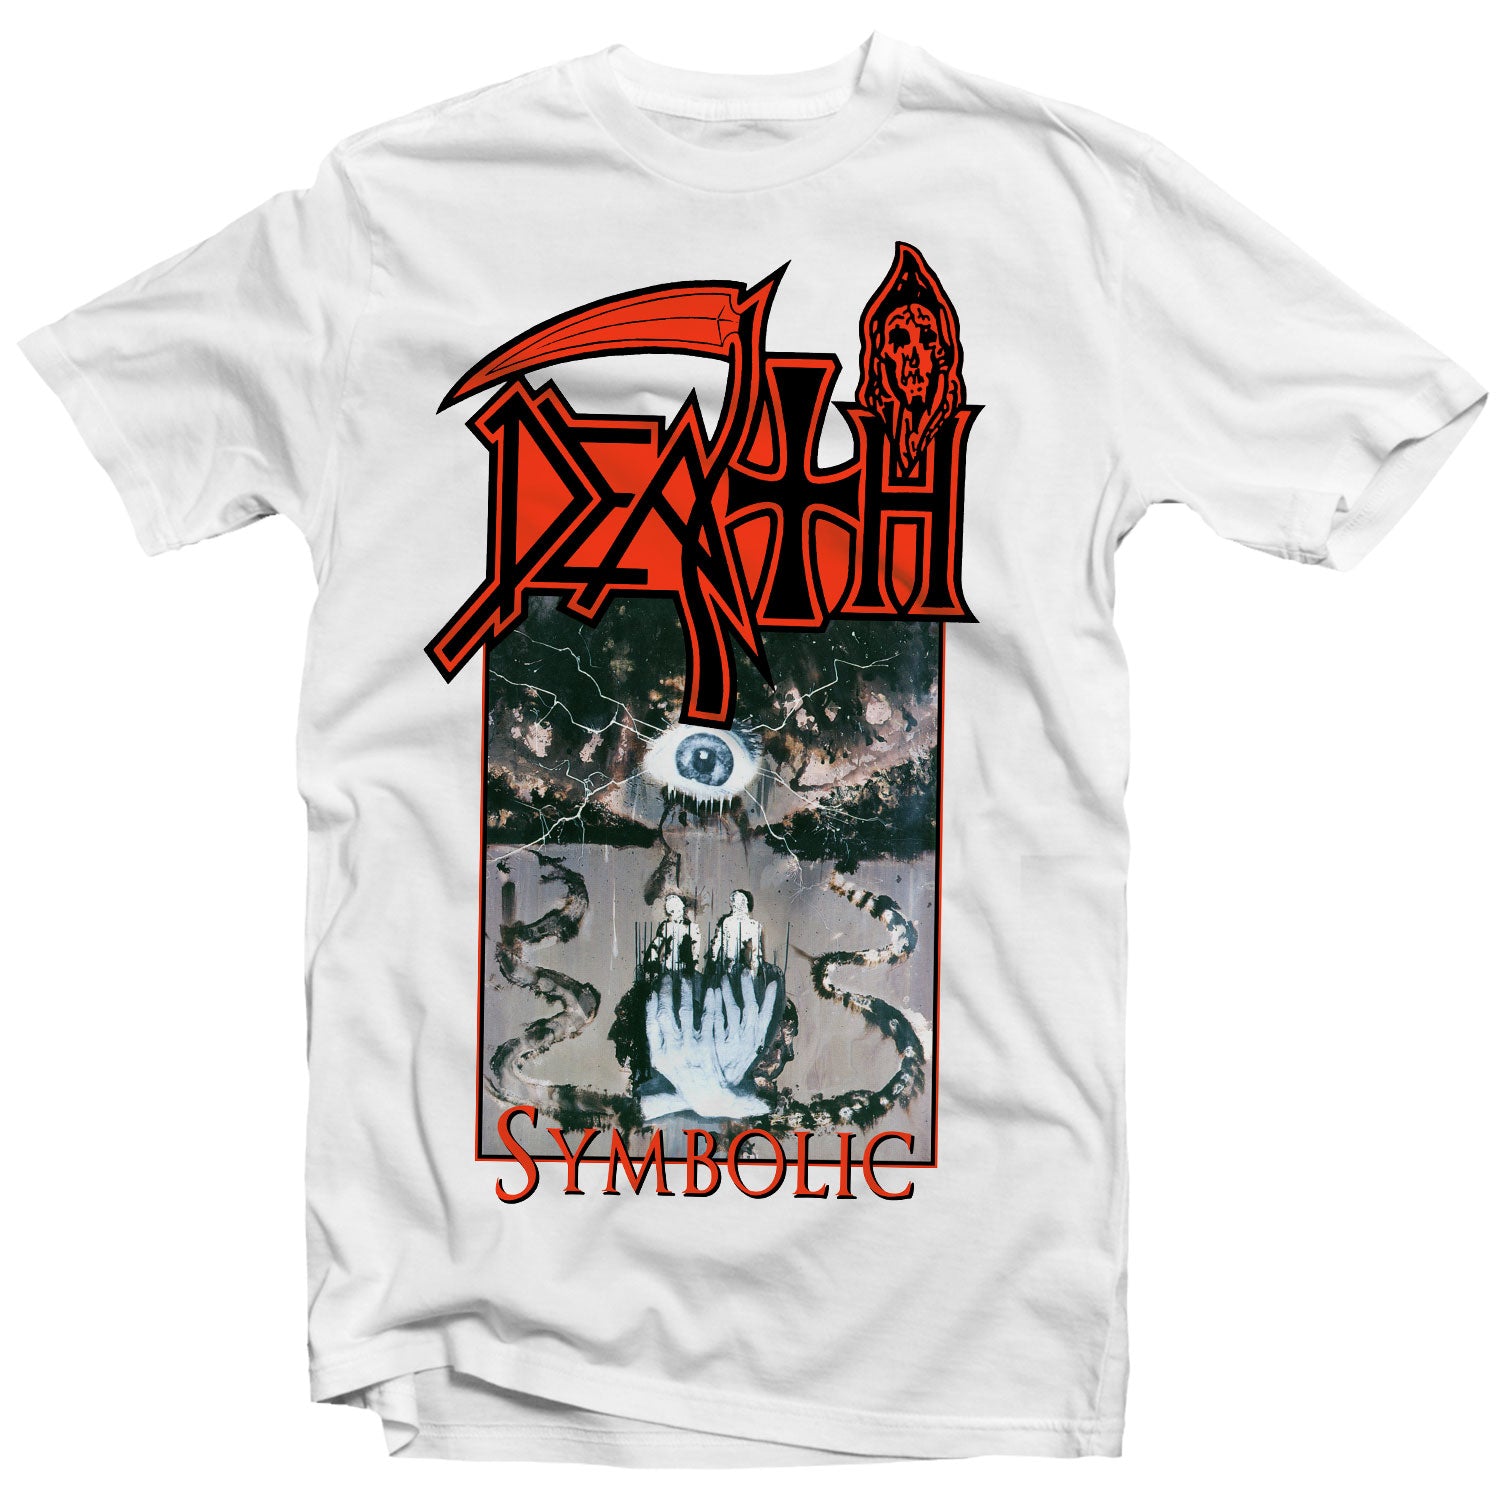 "Symbolic (White)" T-Shirt Relapse Records Official Store